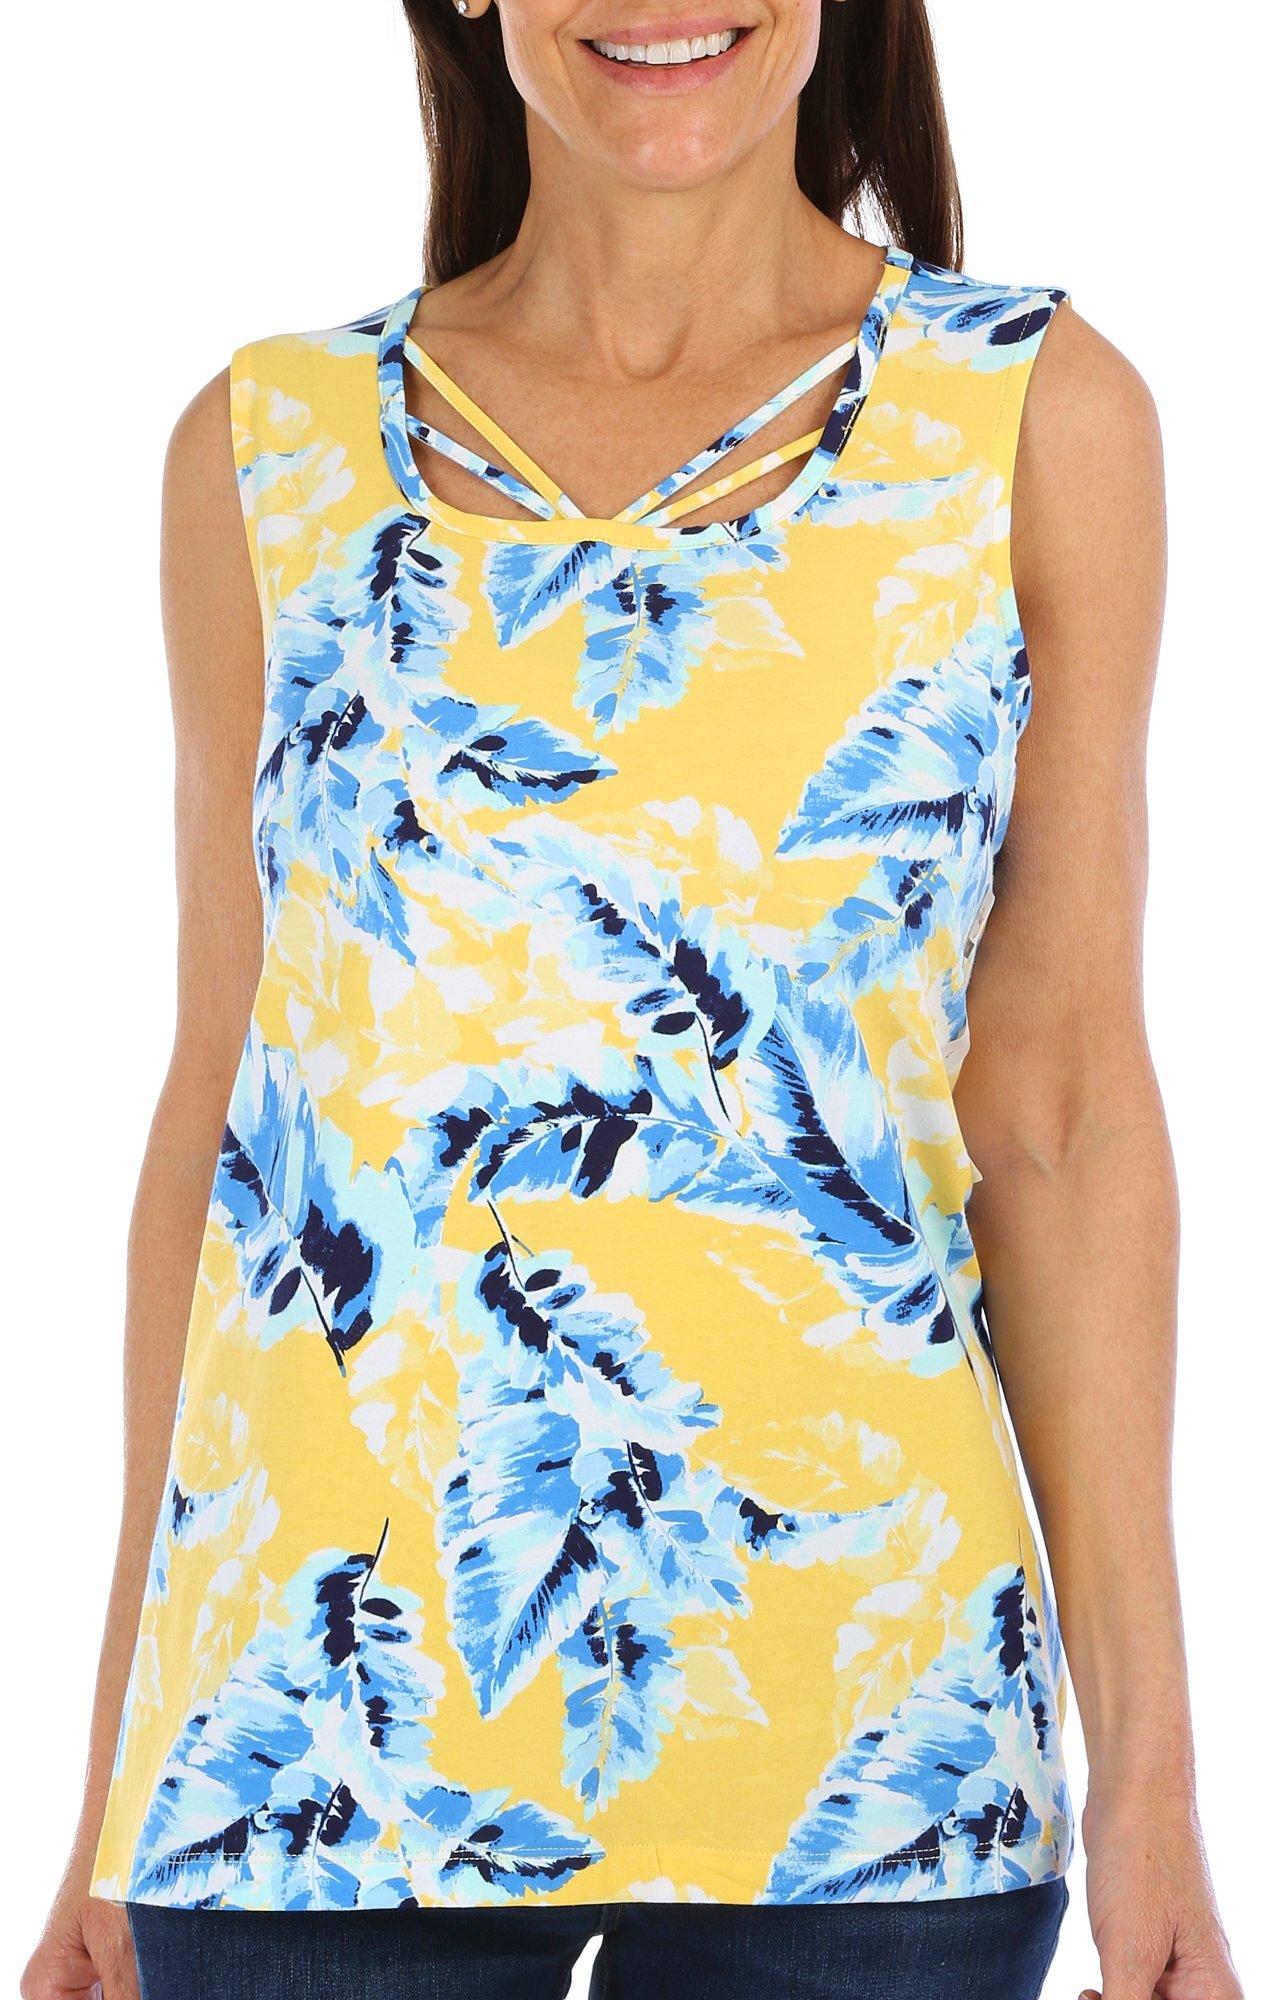 Coral Bay Womens Feather Print Crisscross Keyhole Top